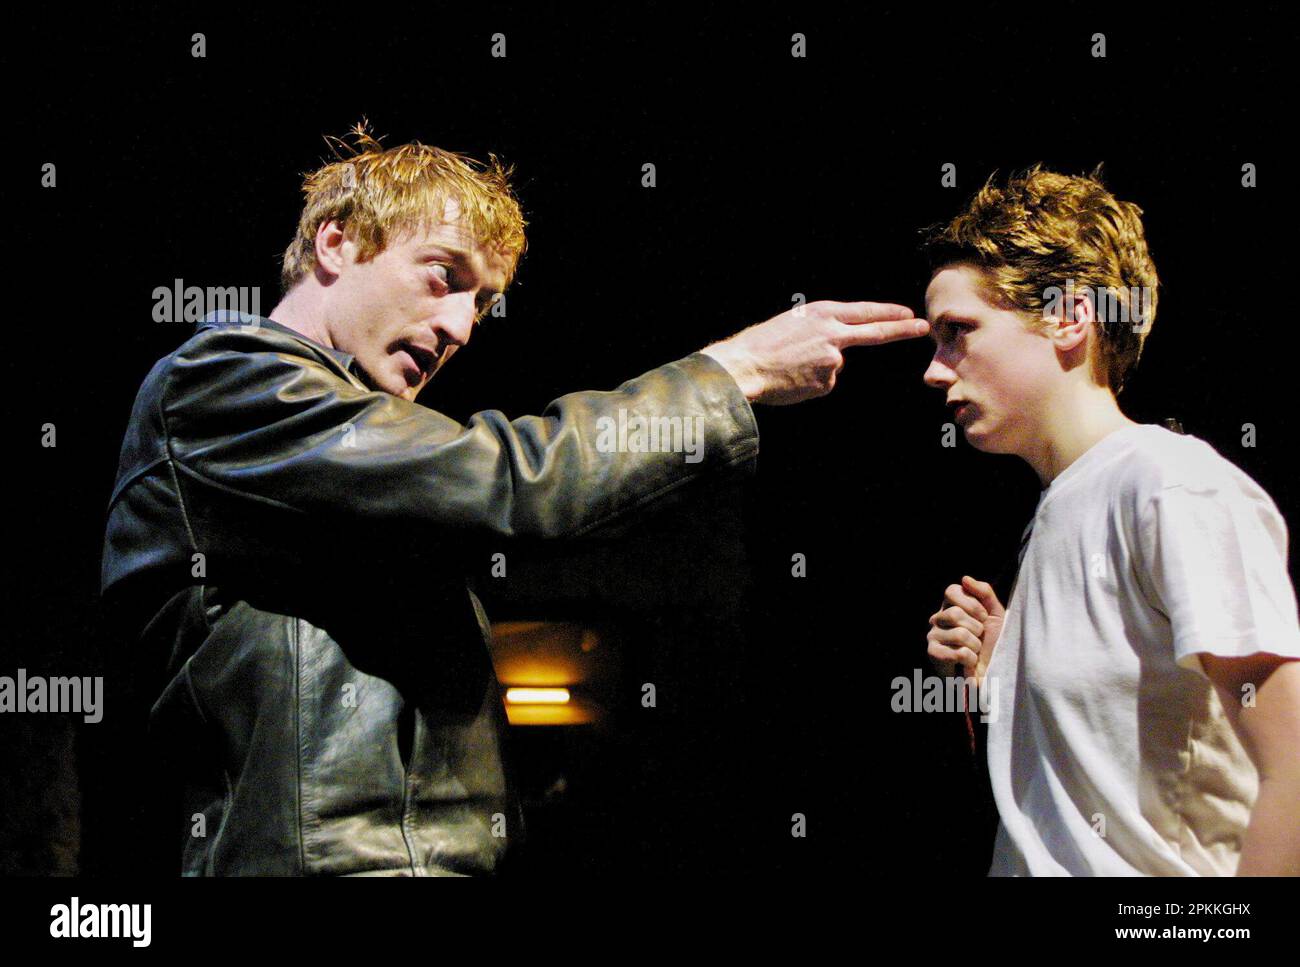 David Wilmot (Padraic), Kerry Condon (Mairead) in THE LIEUTENANT OF INISHMORE by Martin McDonagh at the Royal Shakespeare Company (RSC), The Other Place, Stratford-upon-Avon, England  11/05/2001 design: Francis O'Connor  lighting: Tim Mitchell  director: Wilson Milam Stock Photo